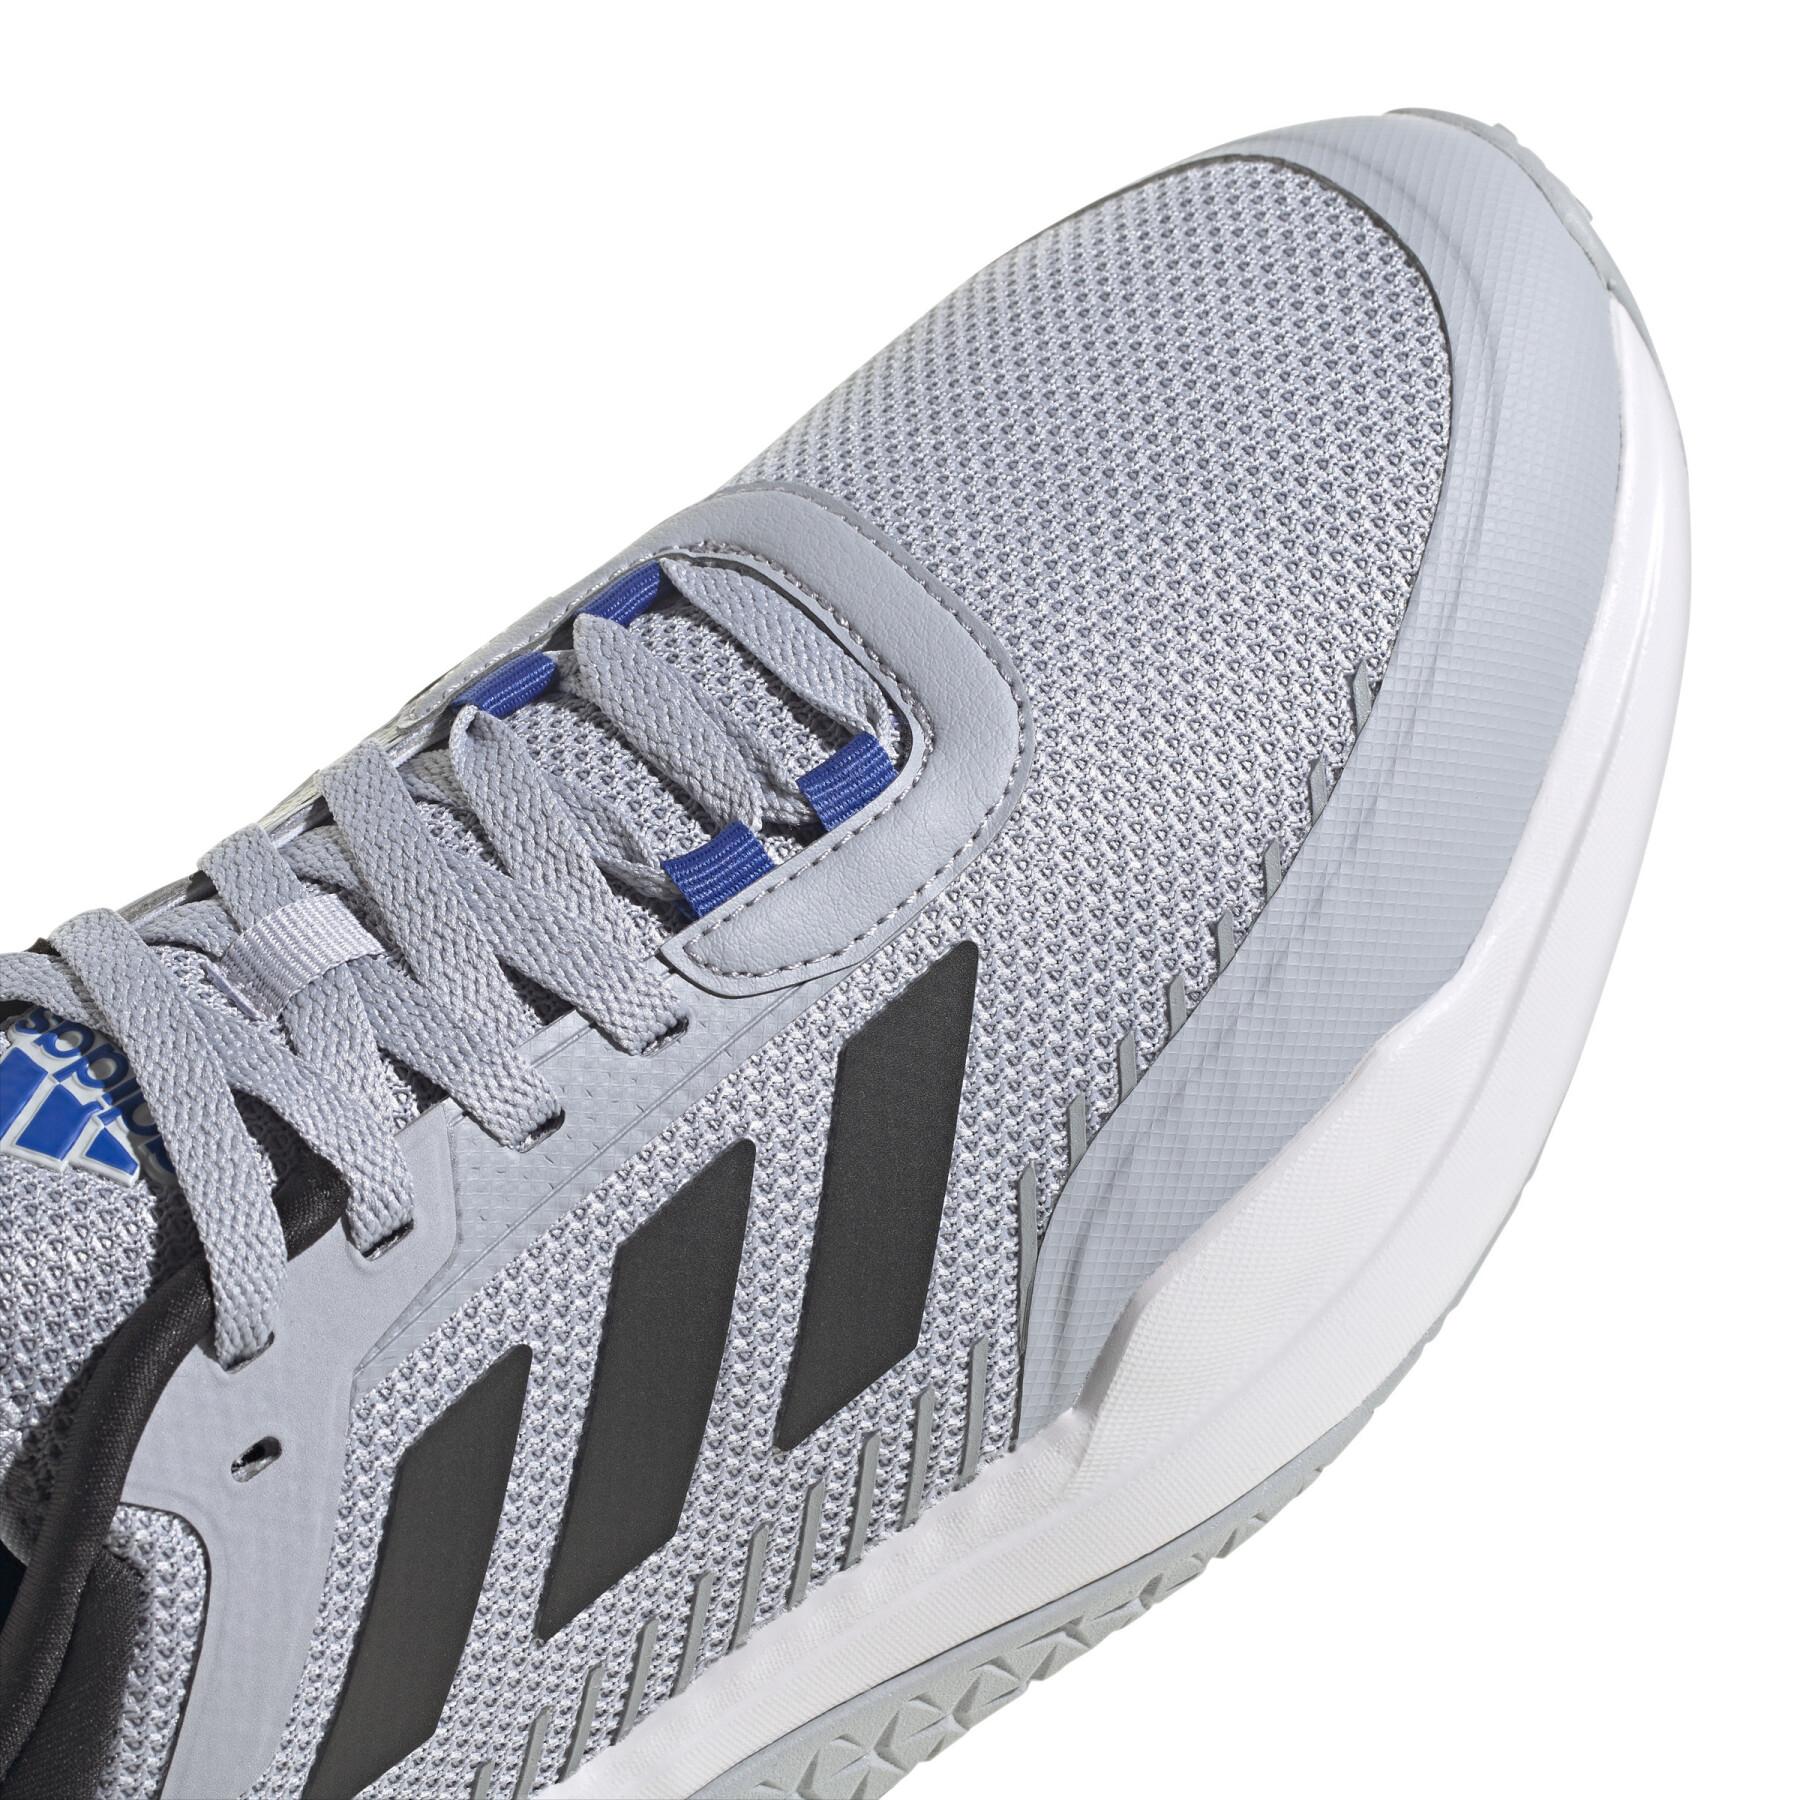 Chaussures adidas 85 Trainer V